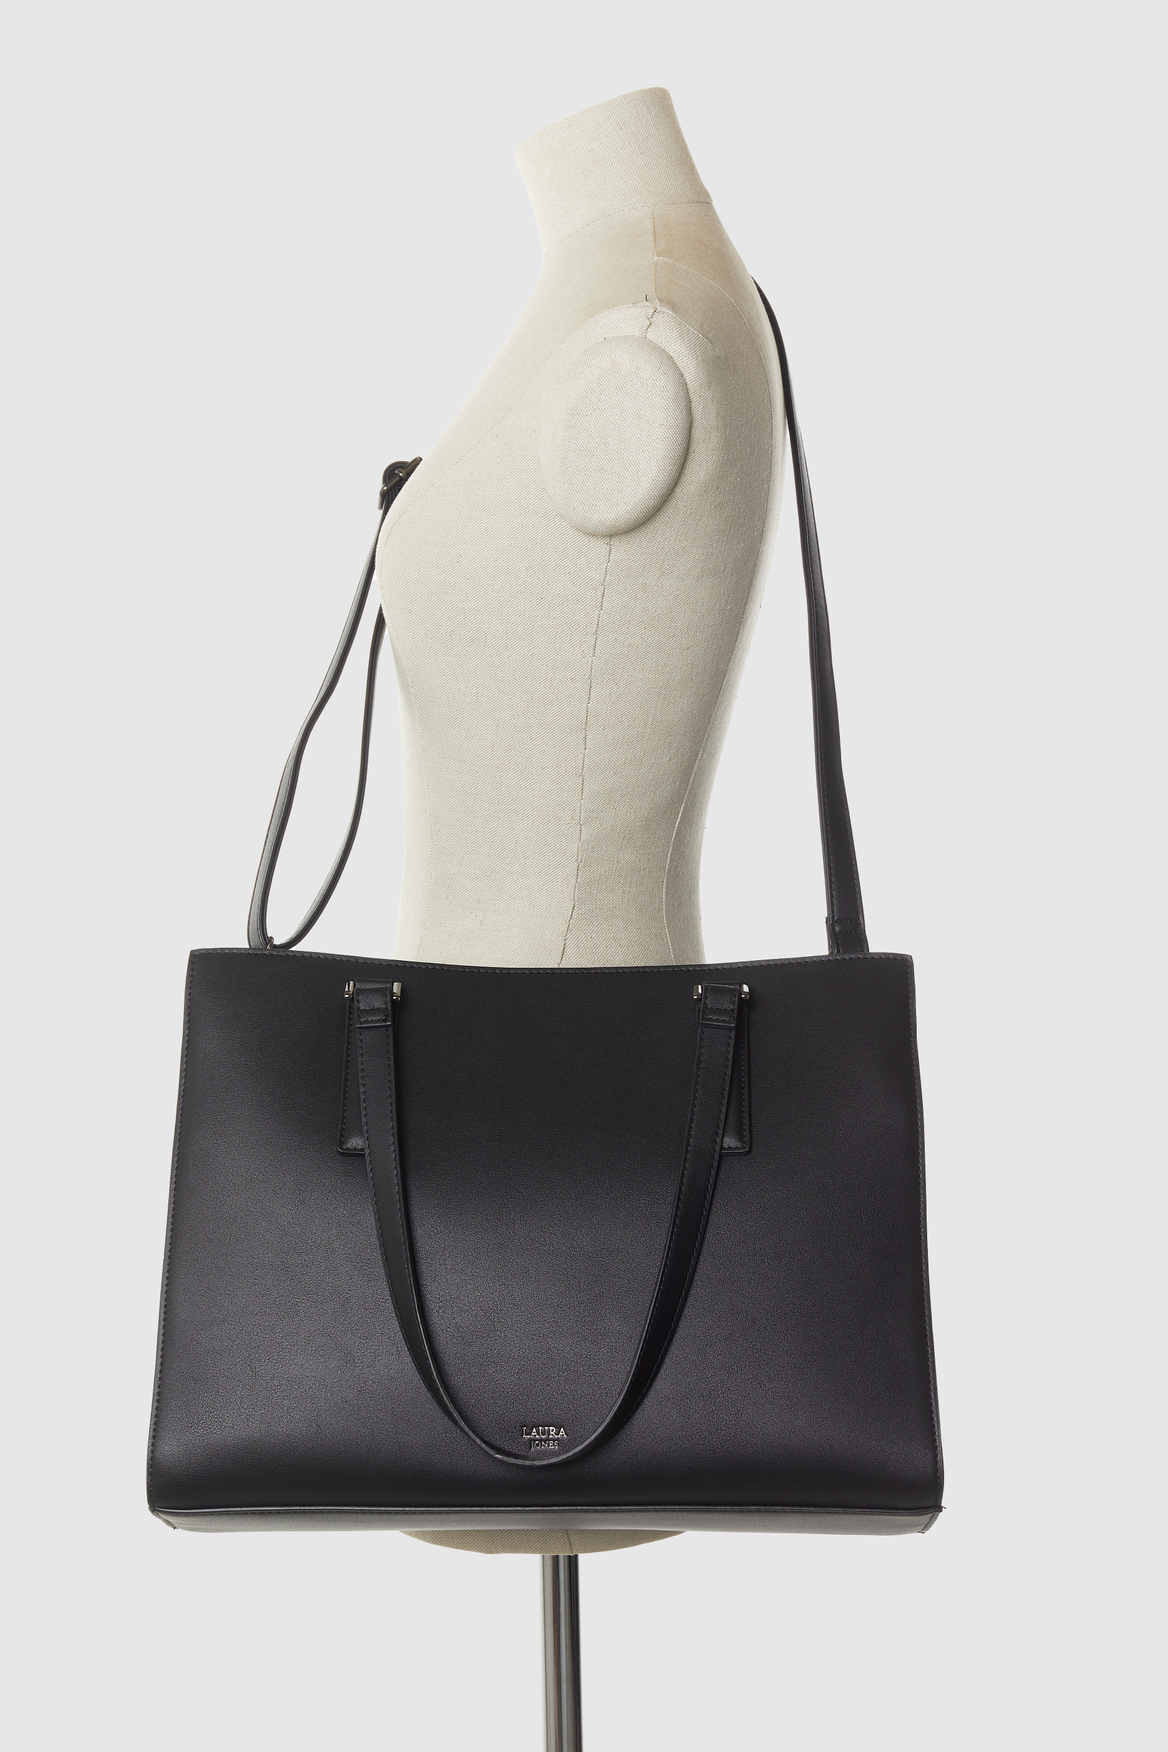 10 chic laptop tote bags to shop for the office